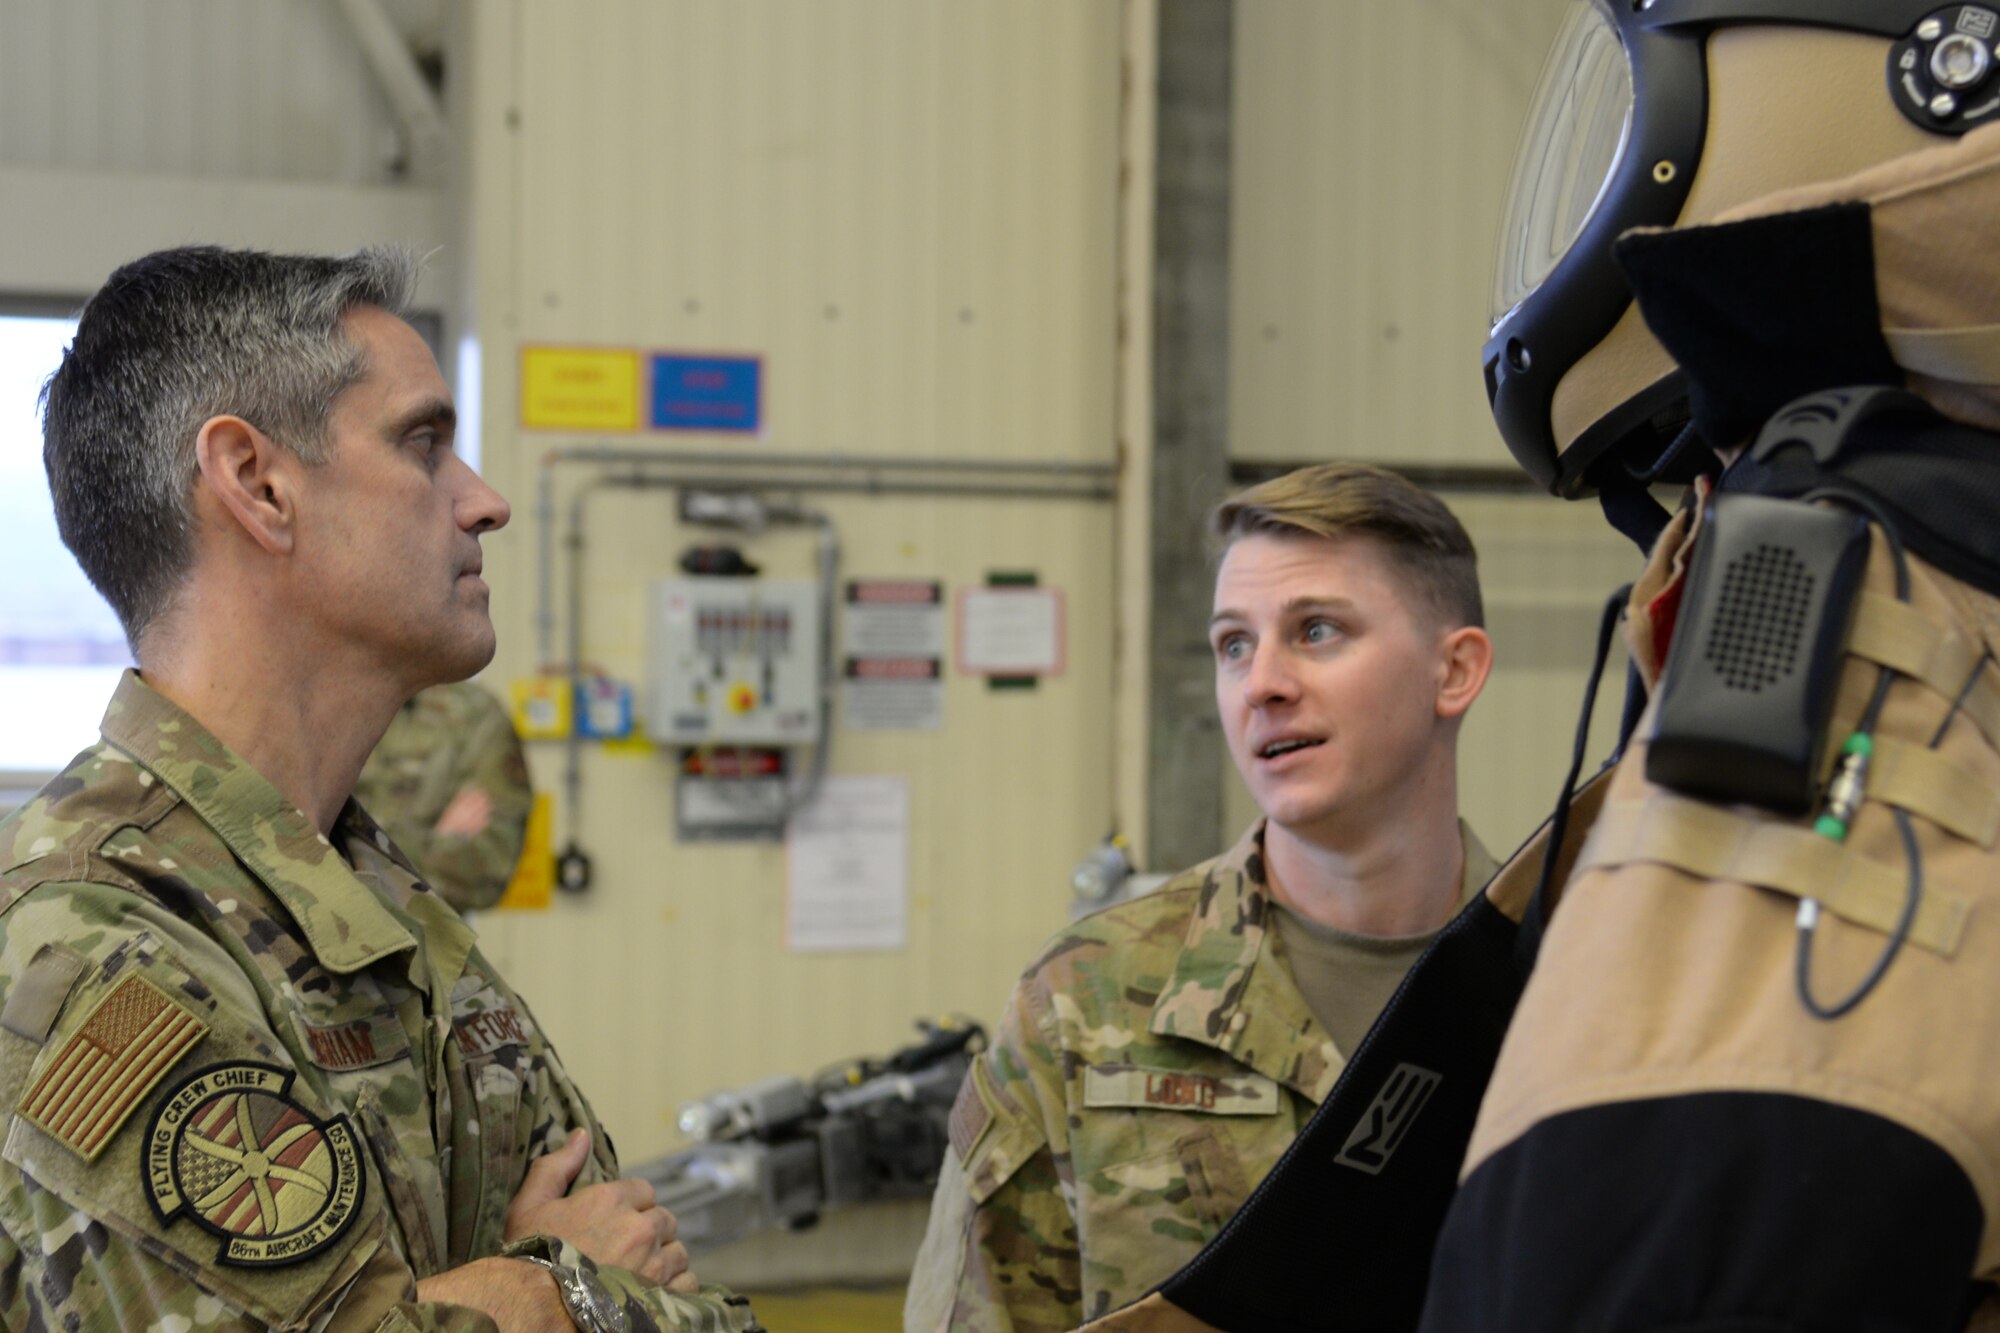 U.S. Air Force Lt. Gen. Steven Basham, U.S. Air Forces in Europe-Air Forces Africa deputy commander, left, connects with Staff Sgt. Michael Long, 786th Civil Engineer Squadron explosive ordnance disposal craftsman, in a hangar during a base tour of Ramstein on Jan. 17, 2020. Long showed Basham some of the latest gear used by the EOD team and shared some of the history behind the equipment. (U.S. Air Force photo by Airman 1st Class Daniel Sanchez)